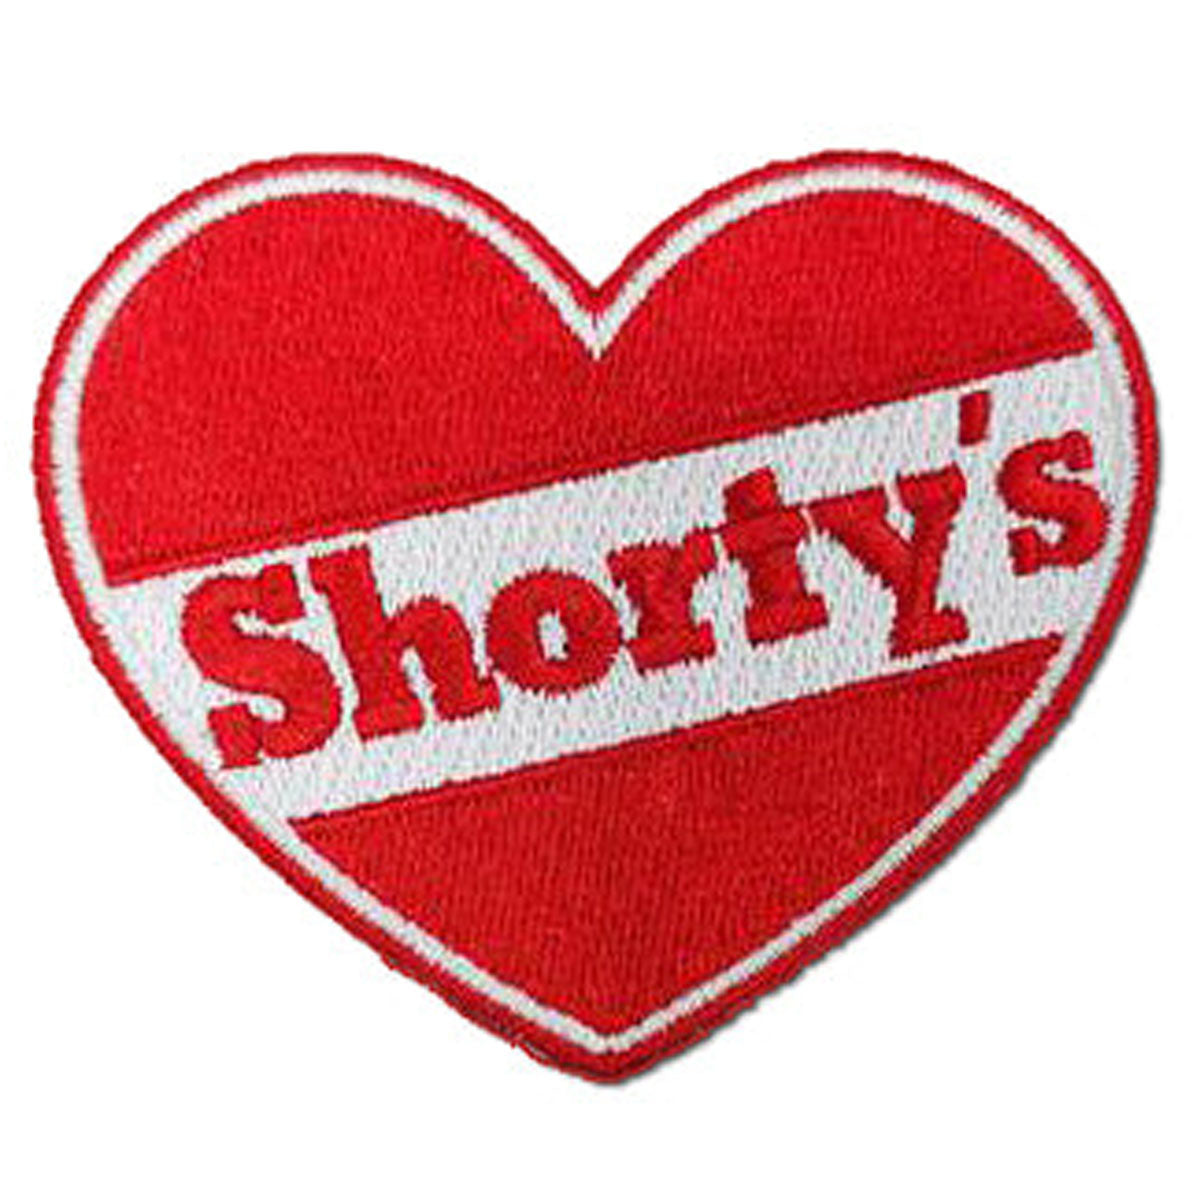 Shorty's Heart Logo Patch image 1